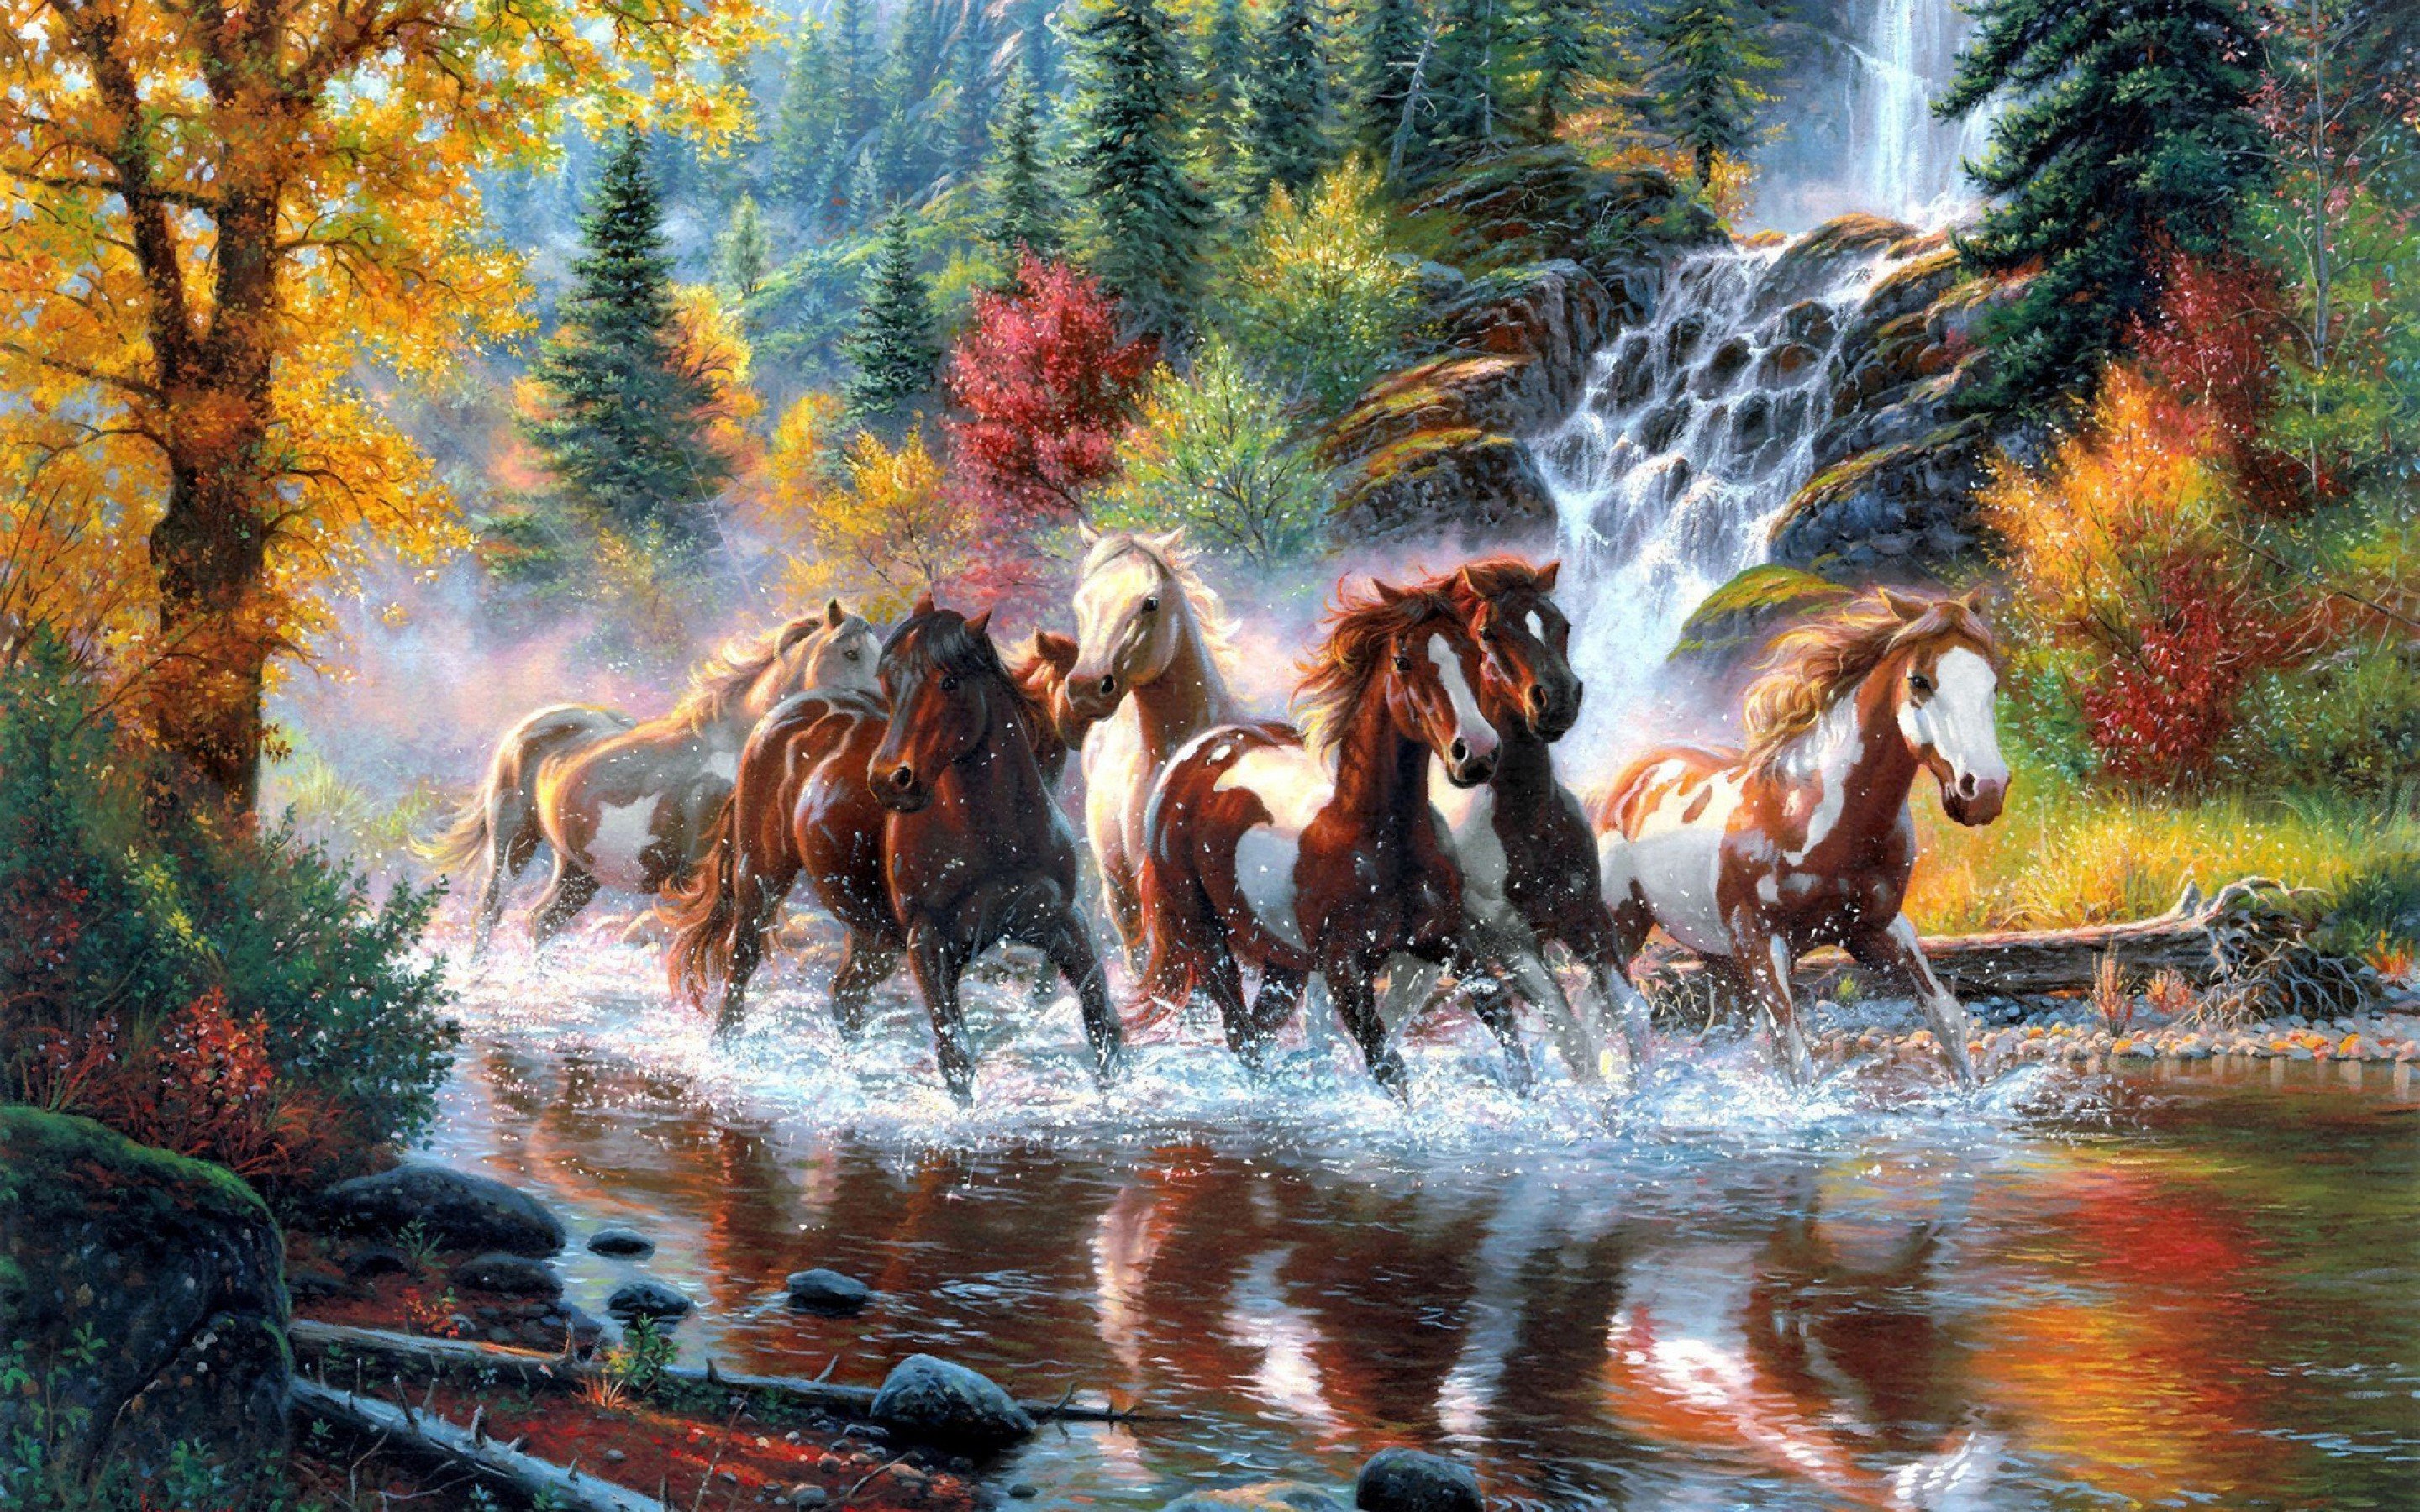 landscape, Nature, Tree, Forest, Woods, River, Horse, Artwork, Painting, Waterfall, Autumn, Country, Wester, Native, American, Indian Wallpaper